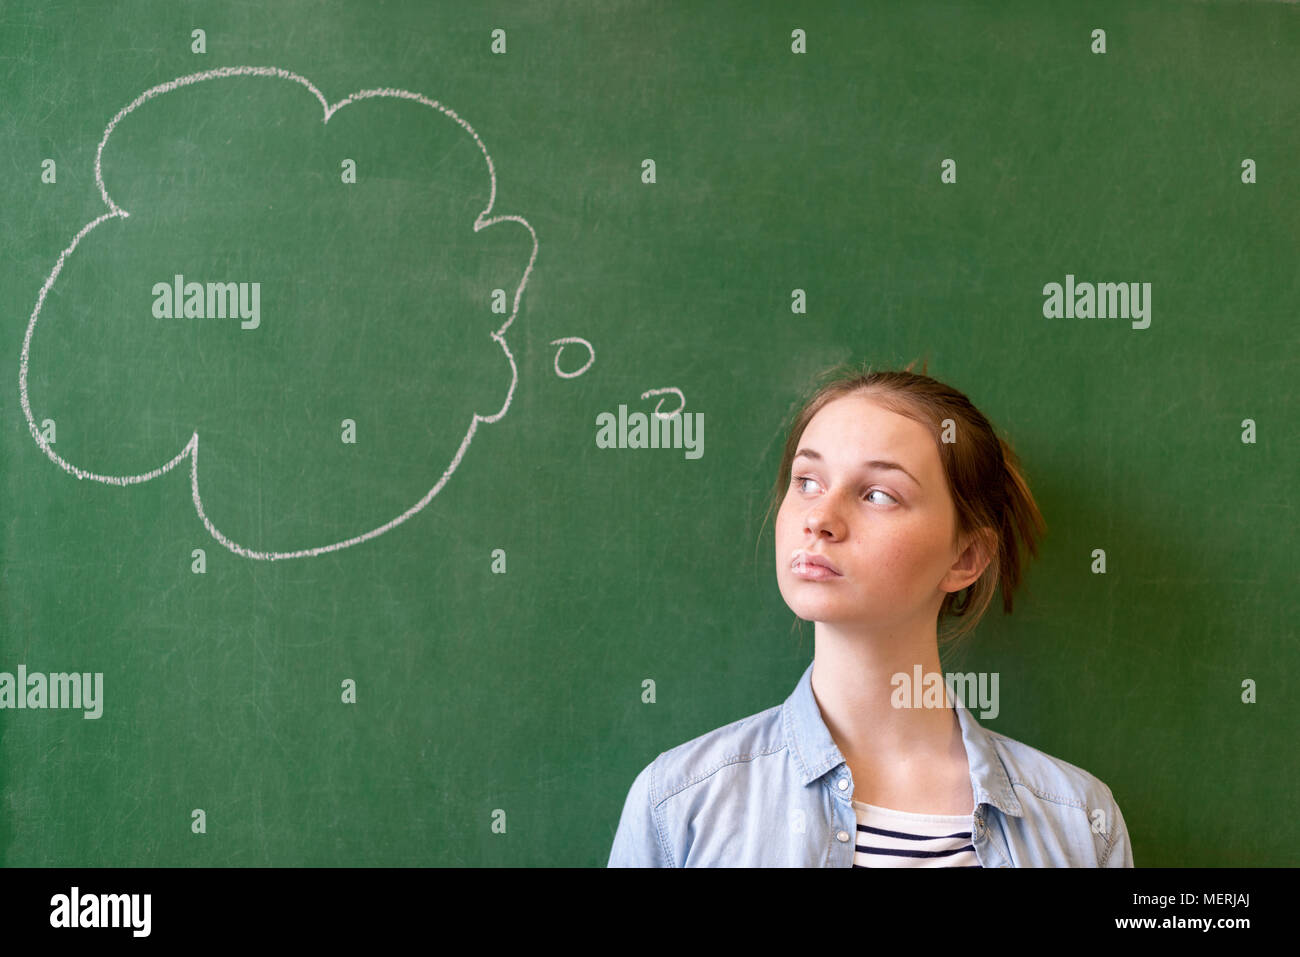 Student thinking blackboard concept. Pensive girl looking at thought bubble on chalkboard background. Caucasian student. Future, profession. Stock Photo